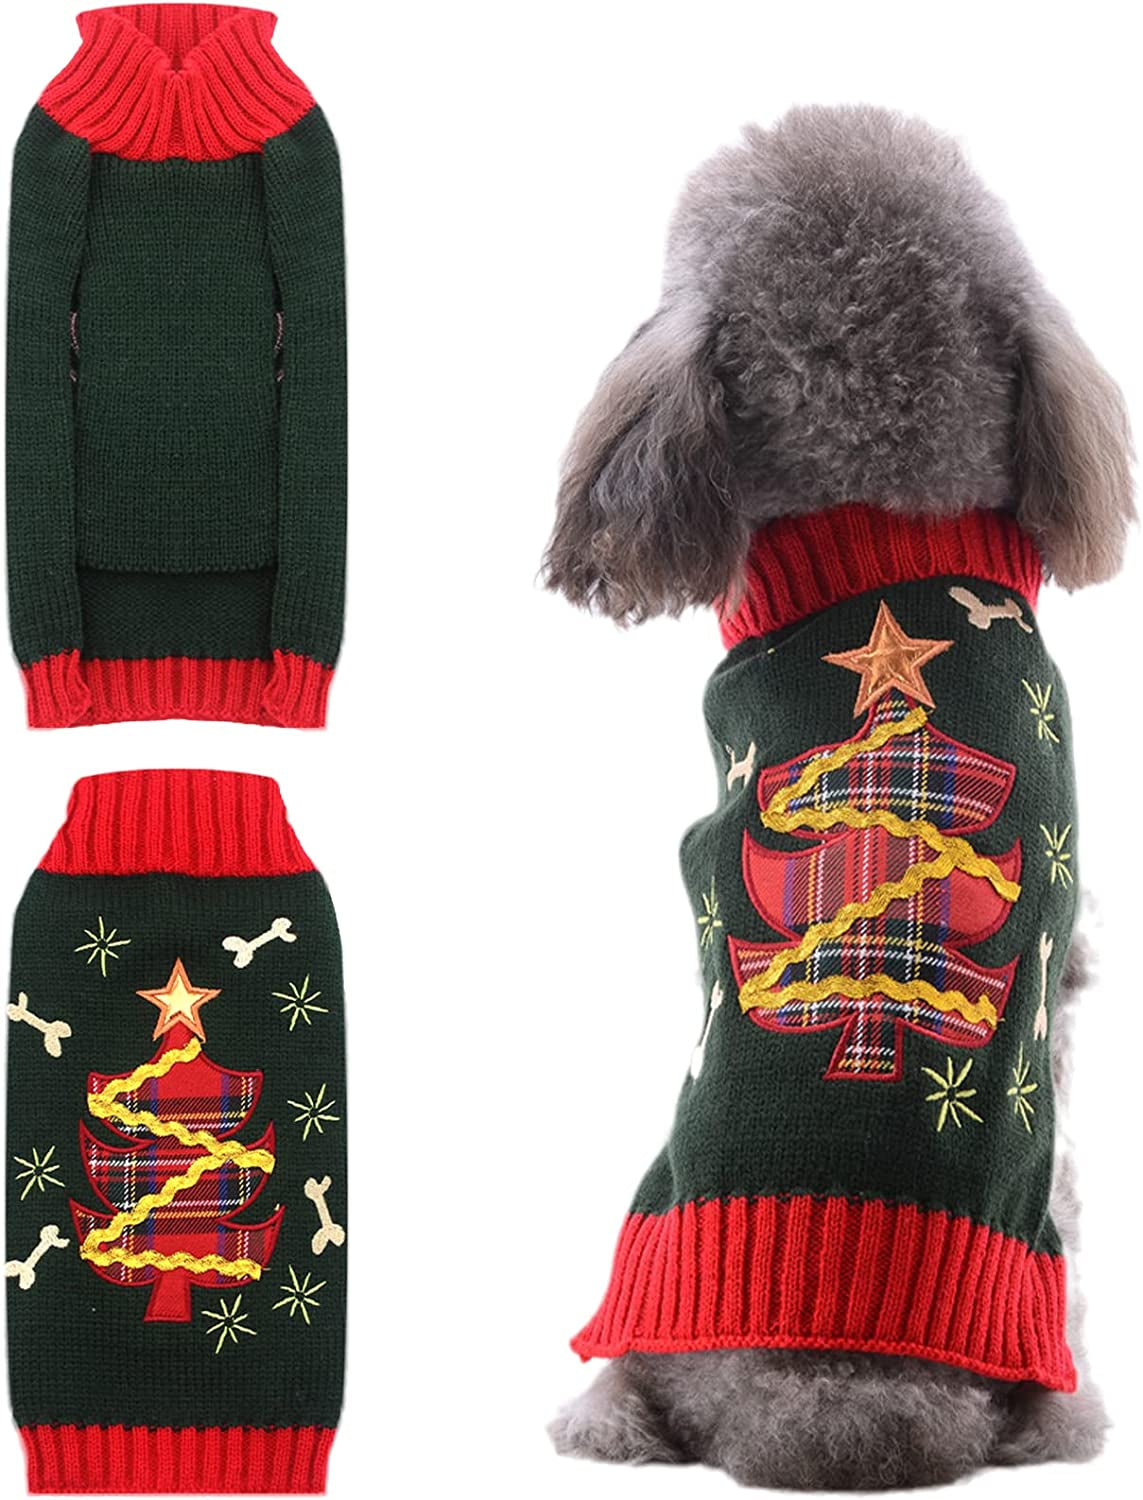 TENGZHI Dog Christmas Sweater Ugly Xmas Puppy Clothes Costume Warm Knitted Cat Outfit Jumper Cute Reindeer Pet Clothing for Small Medium Large Dogs Cats（S,Black） Animals & Pet Supplies > Pet Supplies > Dog Supplies > Dog Apparel Yi Wu Shi Teng Zhi Dian Zi Shang Wu You Xian Gong Si Olive Green Christmas Tree Medium 